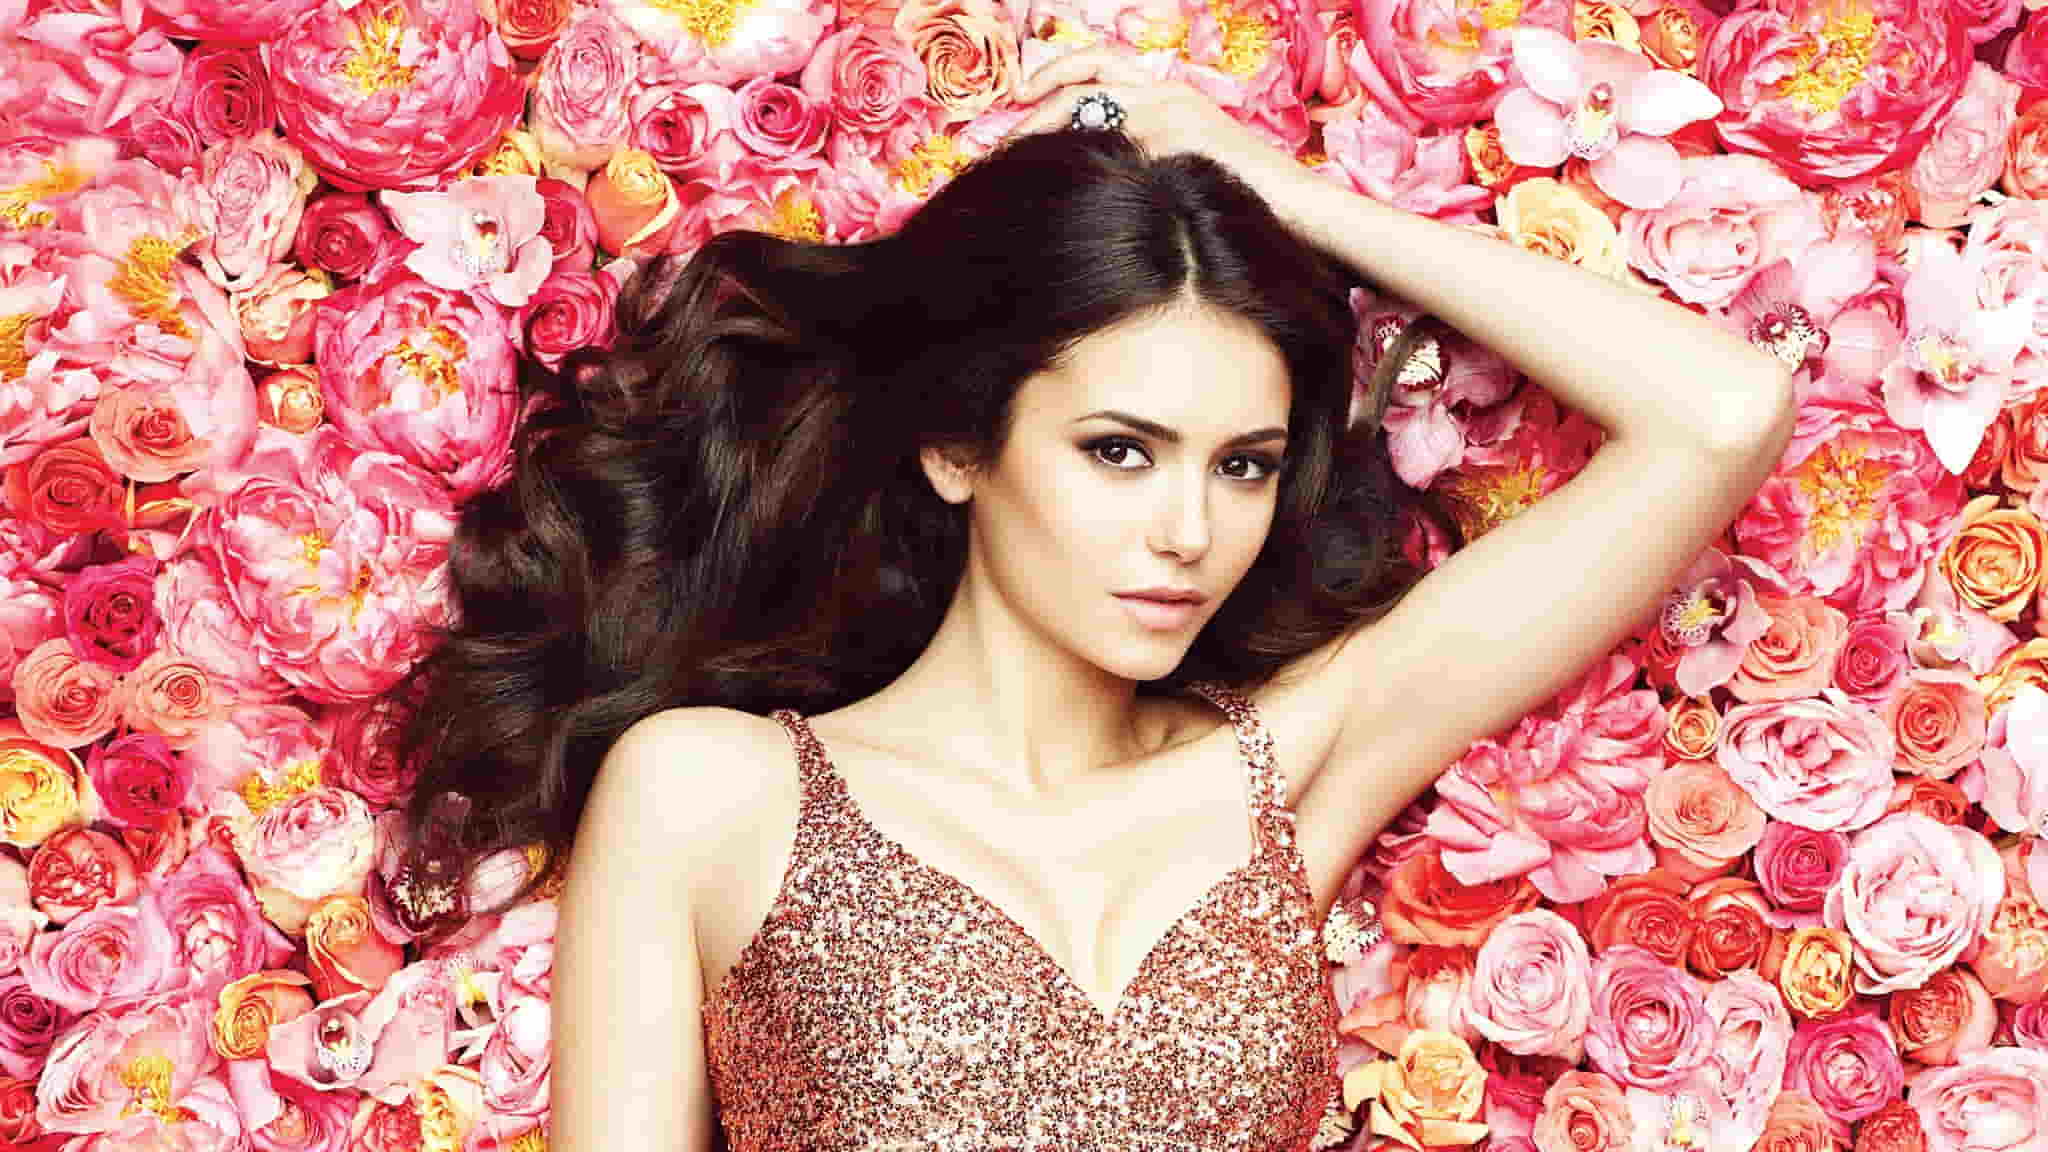 Nina Dobrev in a shimmery dress, laying on pink roses